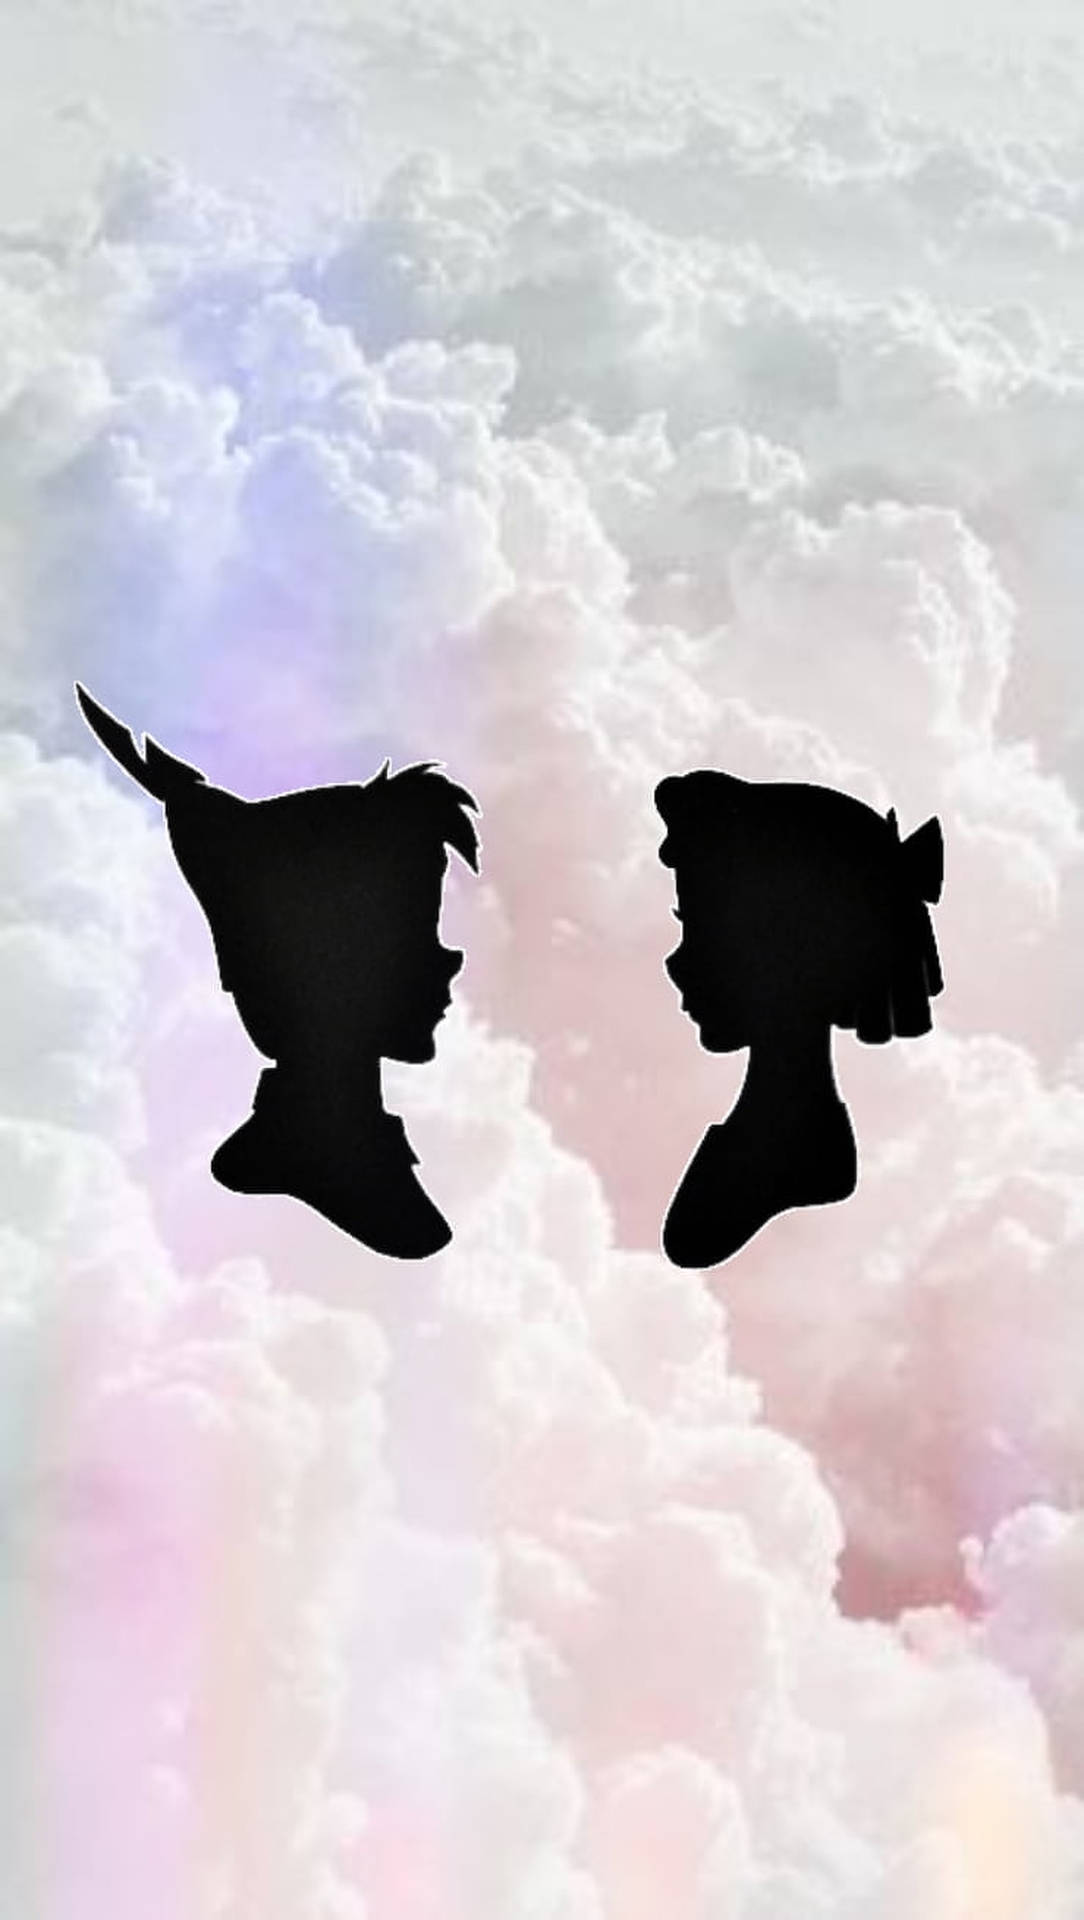 Download Peter Pan And Wendy Silhouette Wallpaper